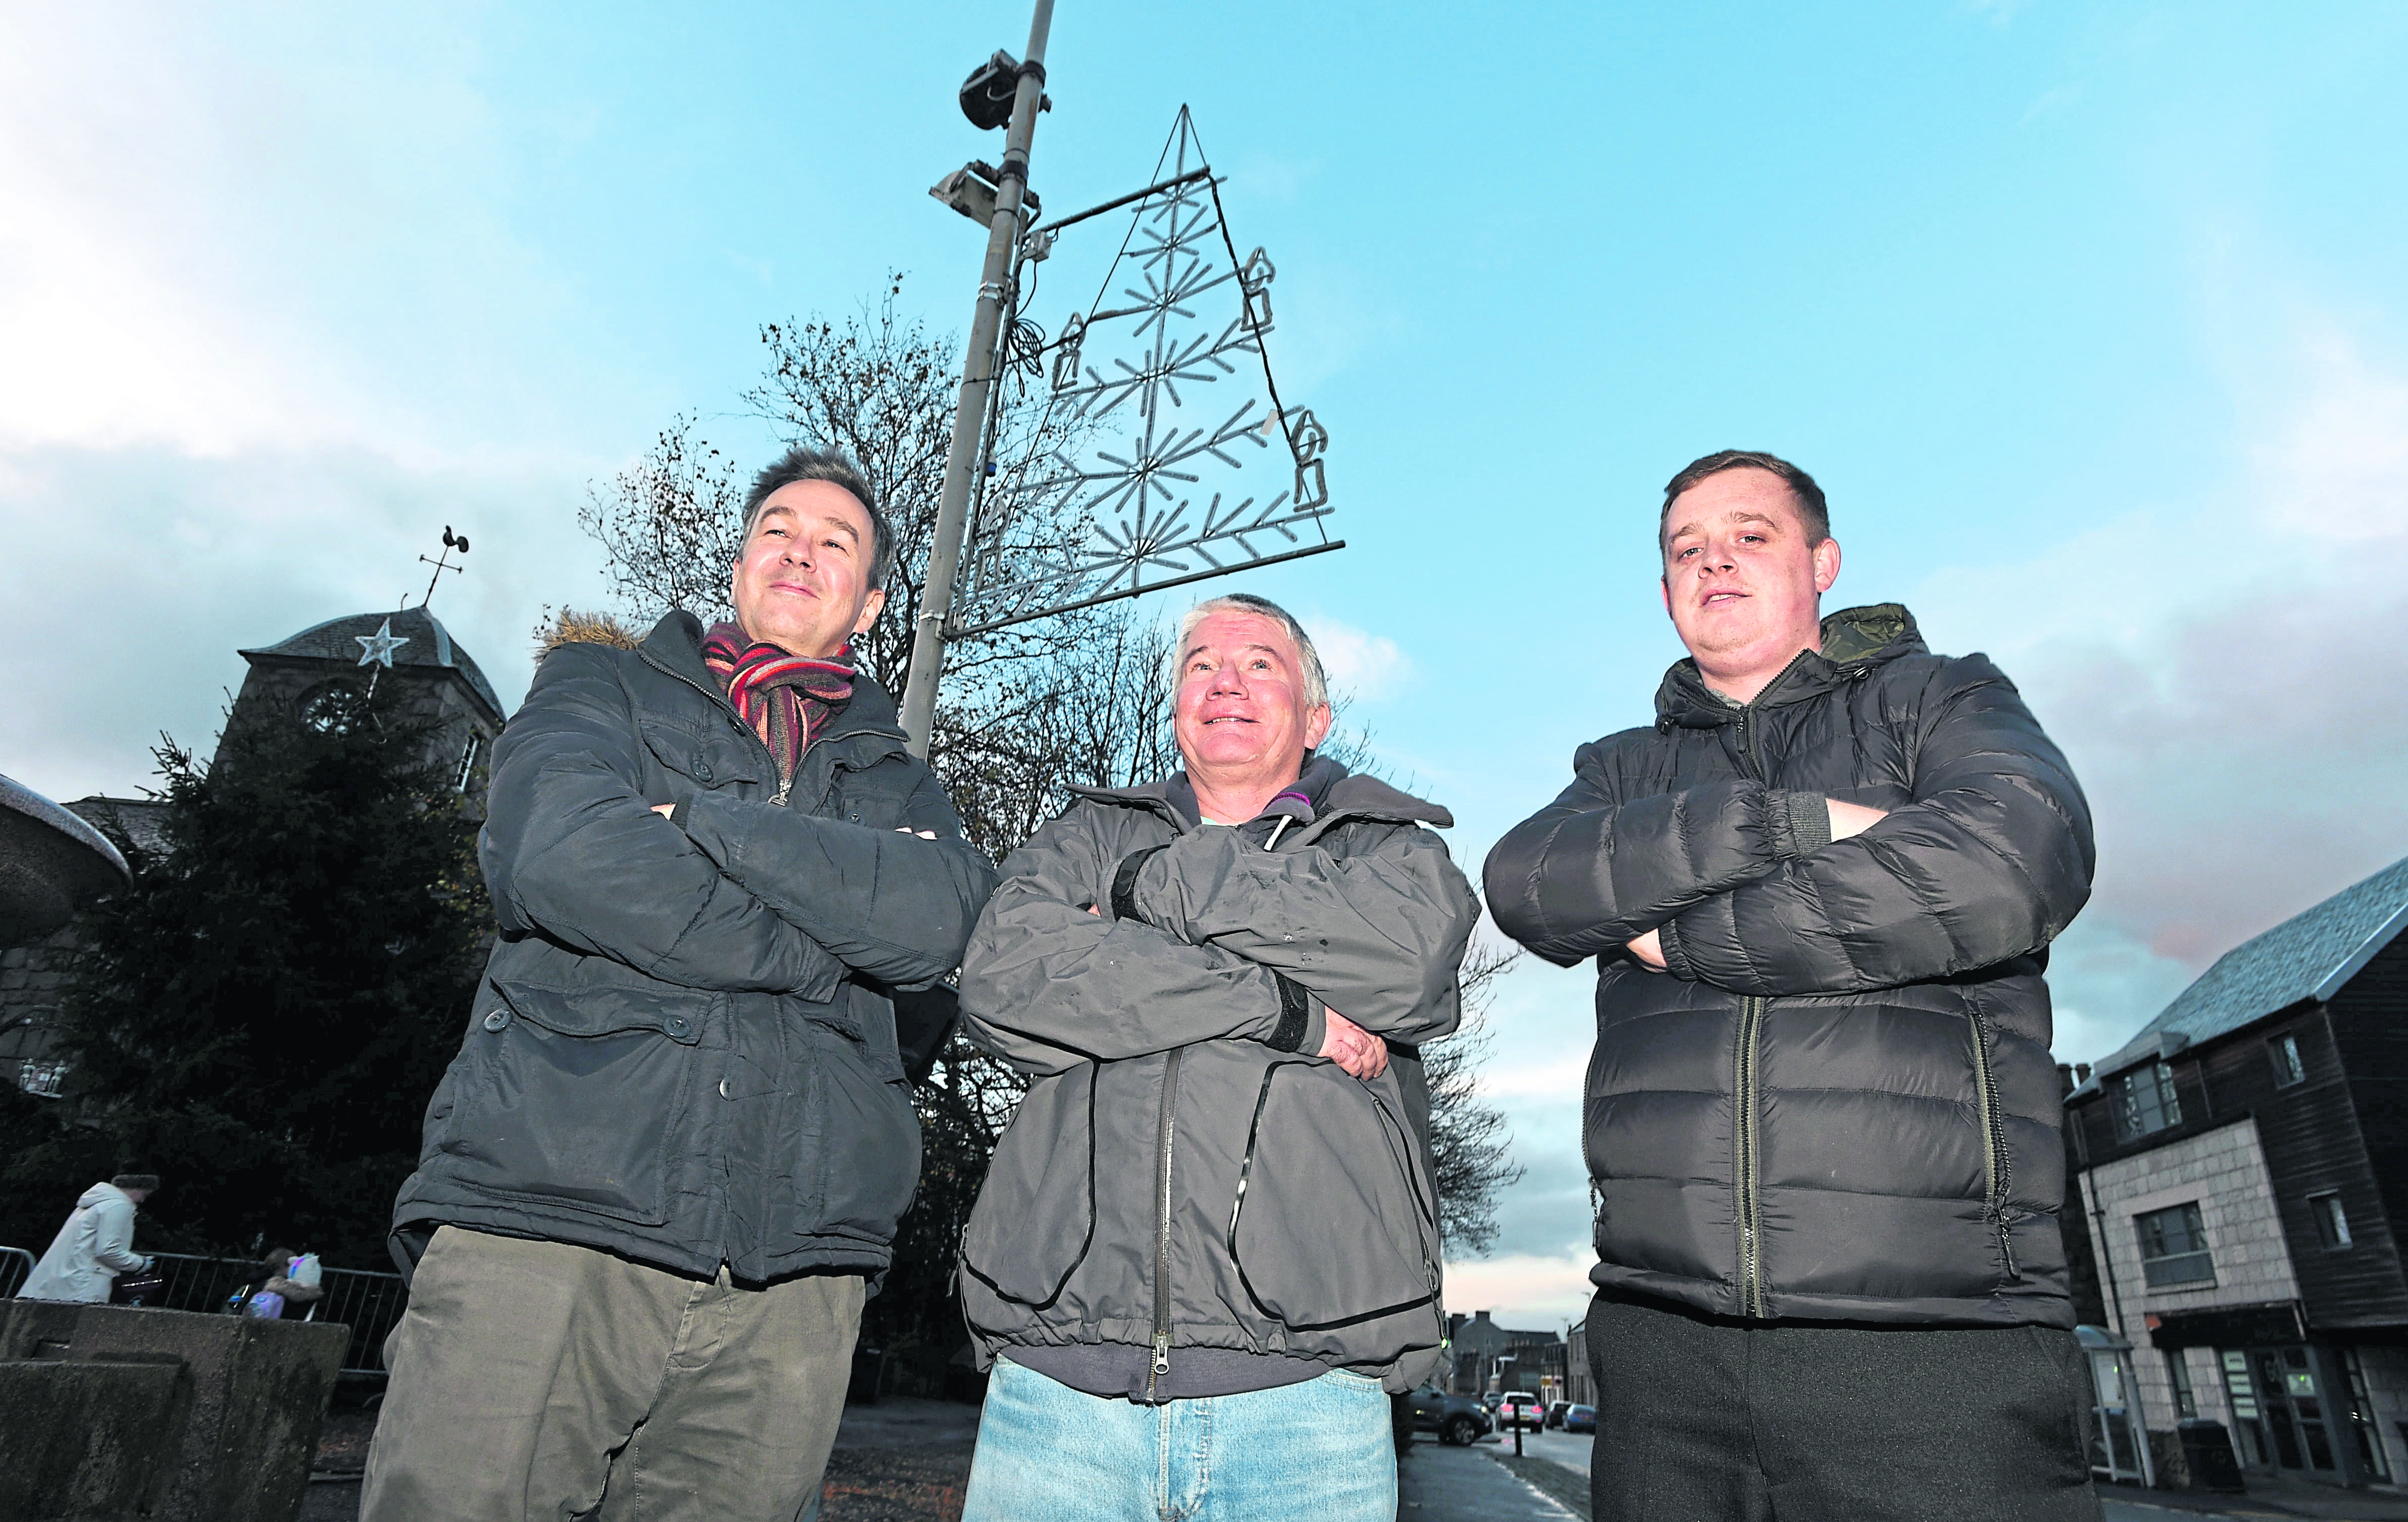 Members of the fundraising committee from left, Kevin Williamson, Nick Dorrington and Steve MacDonald.